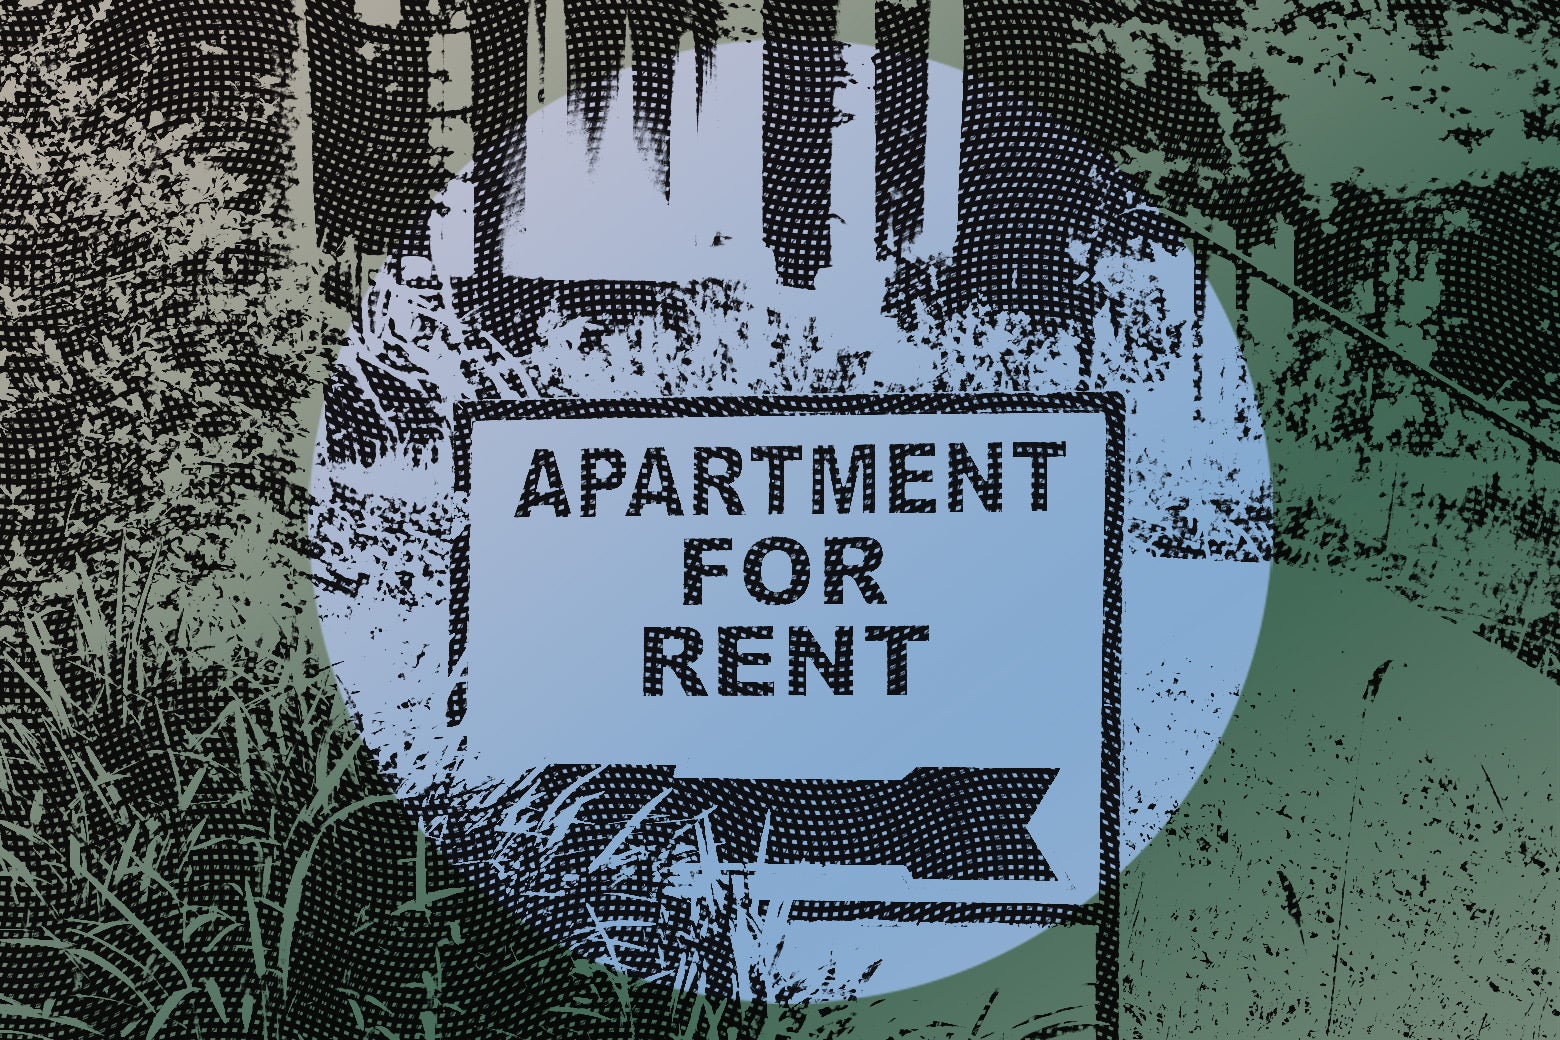 Apartment for rent sign.